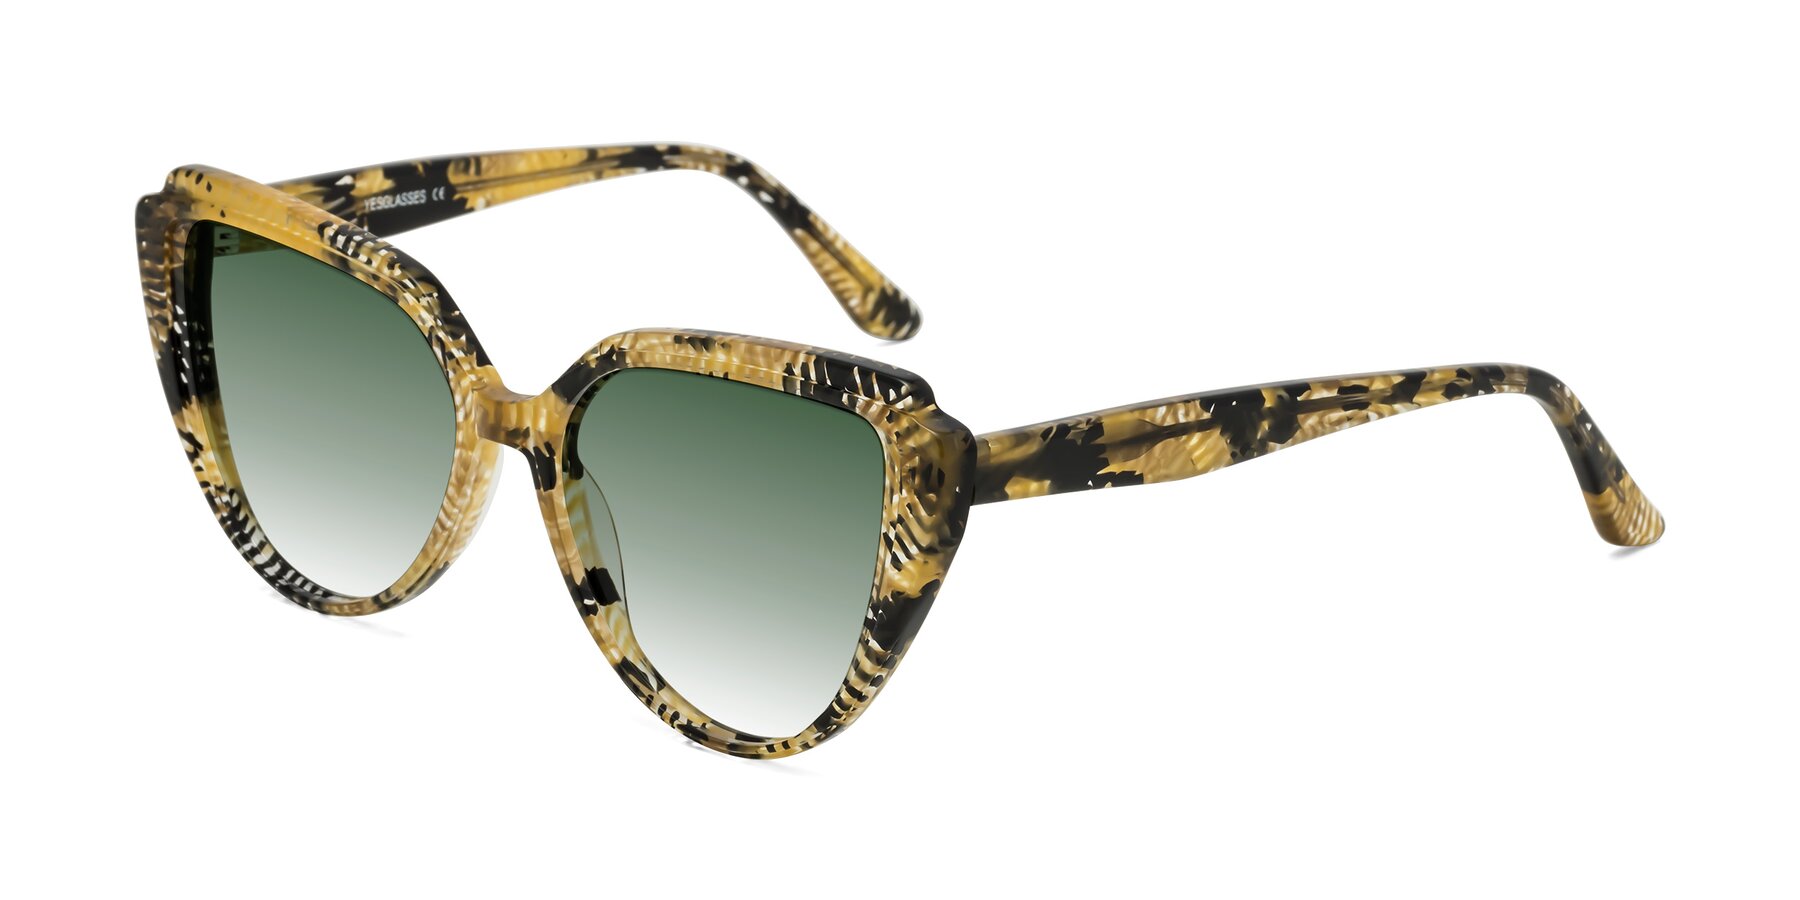 Angle of Zubar in Yellow Snake Print with Green Gradient Lenses